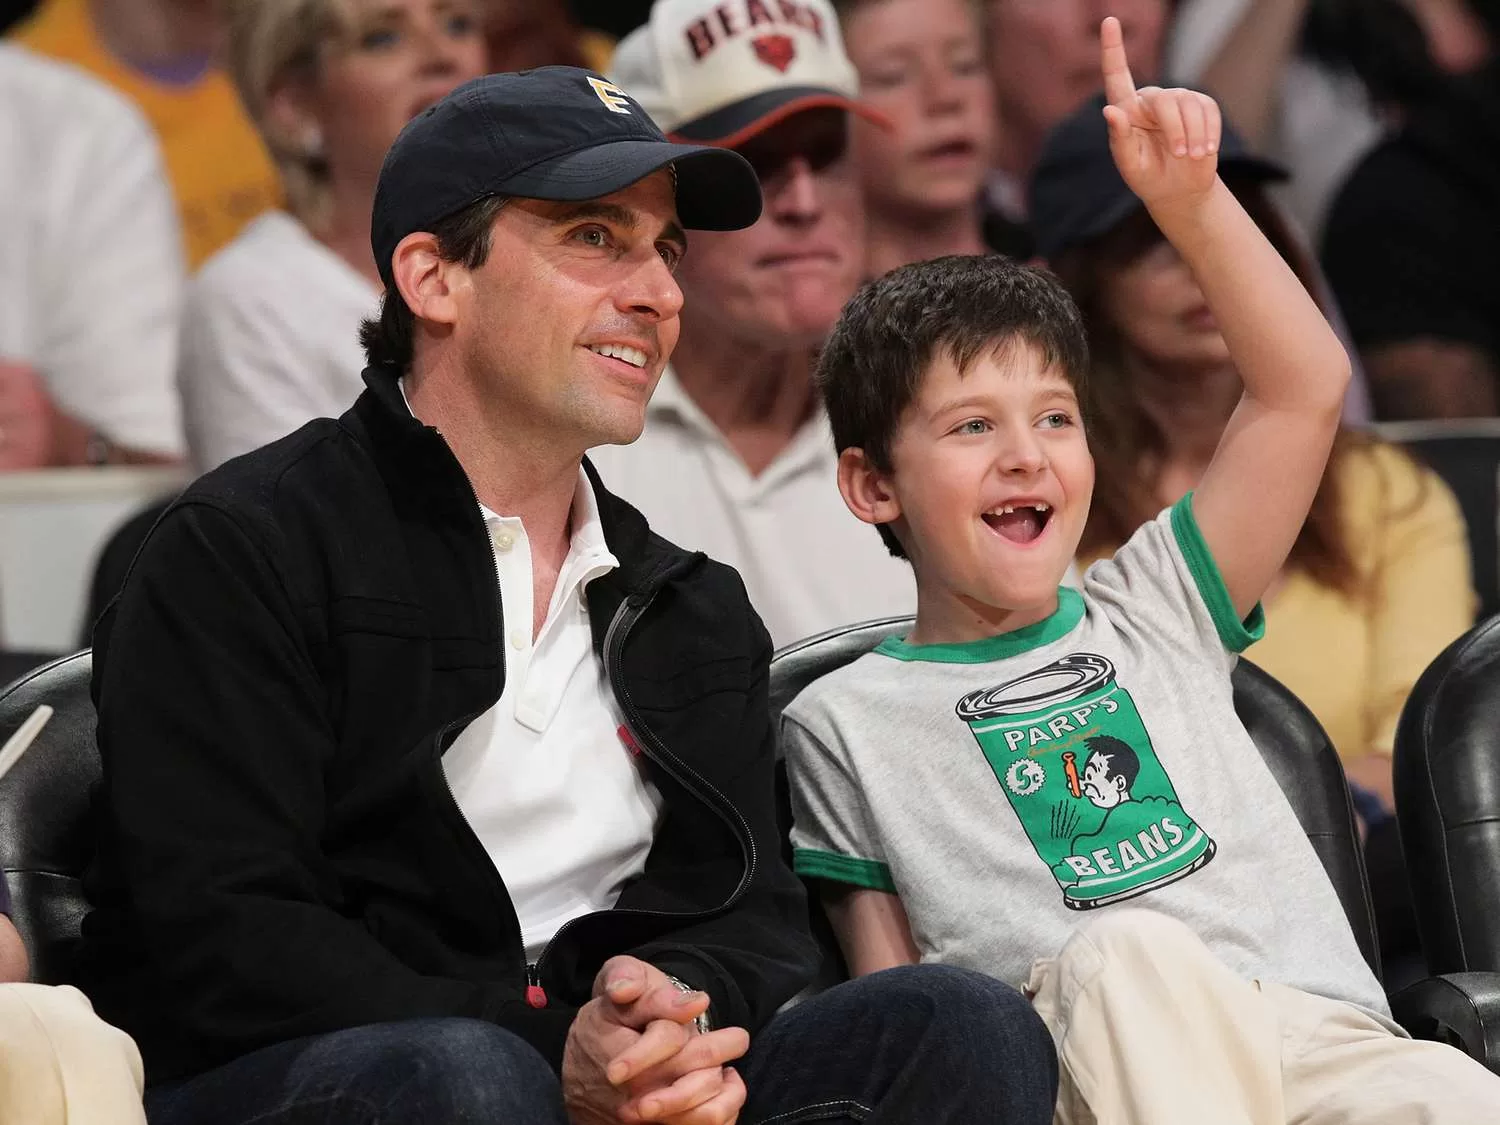 Johnny Carell: All About Steve Carell's Son, Biography, Age, Movies, Net worth